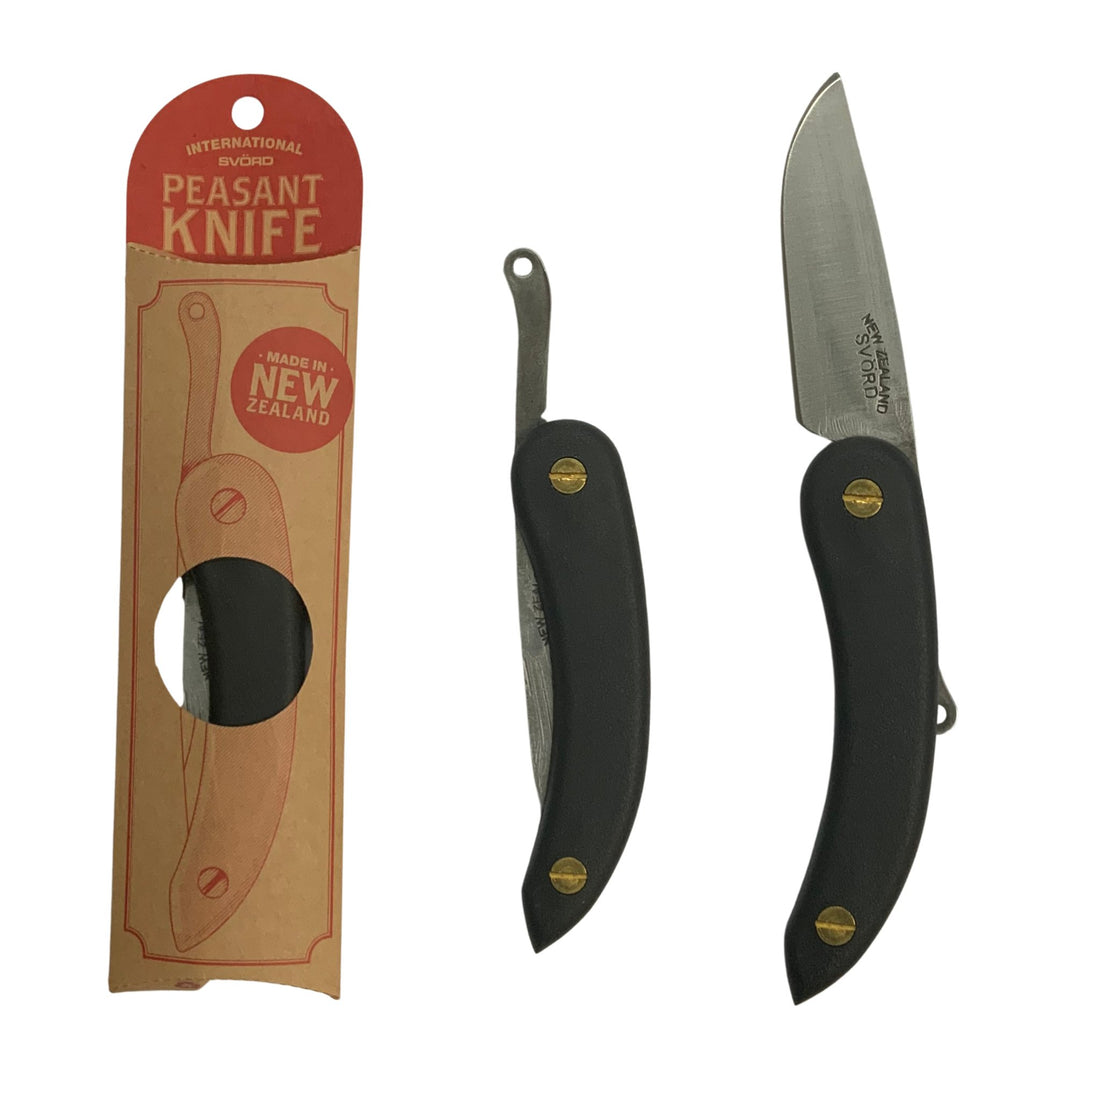 Svord Knives - 3” Peasant Knife, Black - The Flower Crate